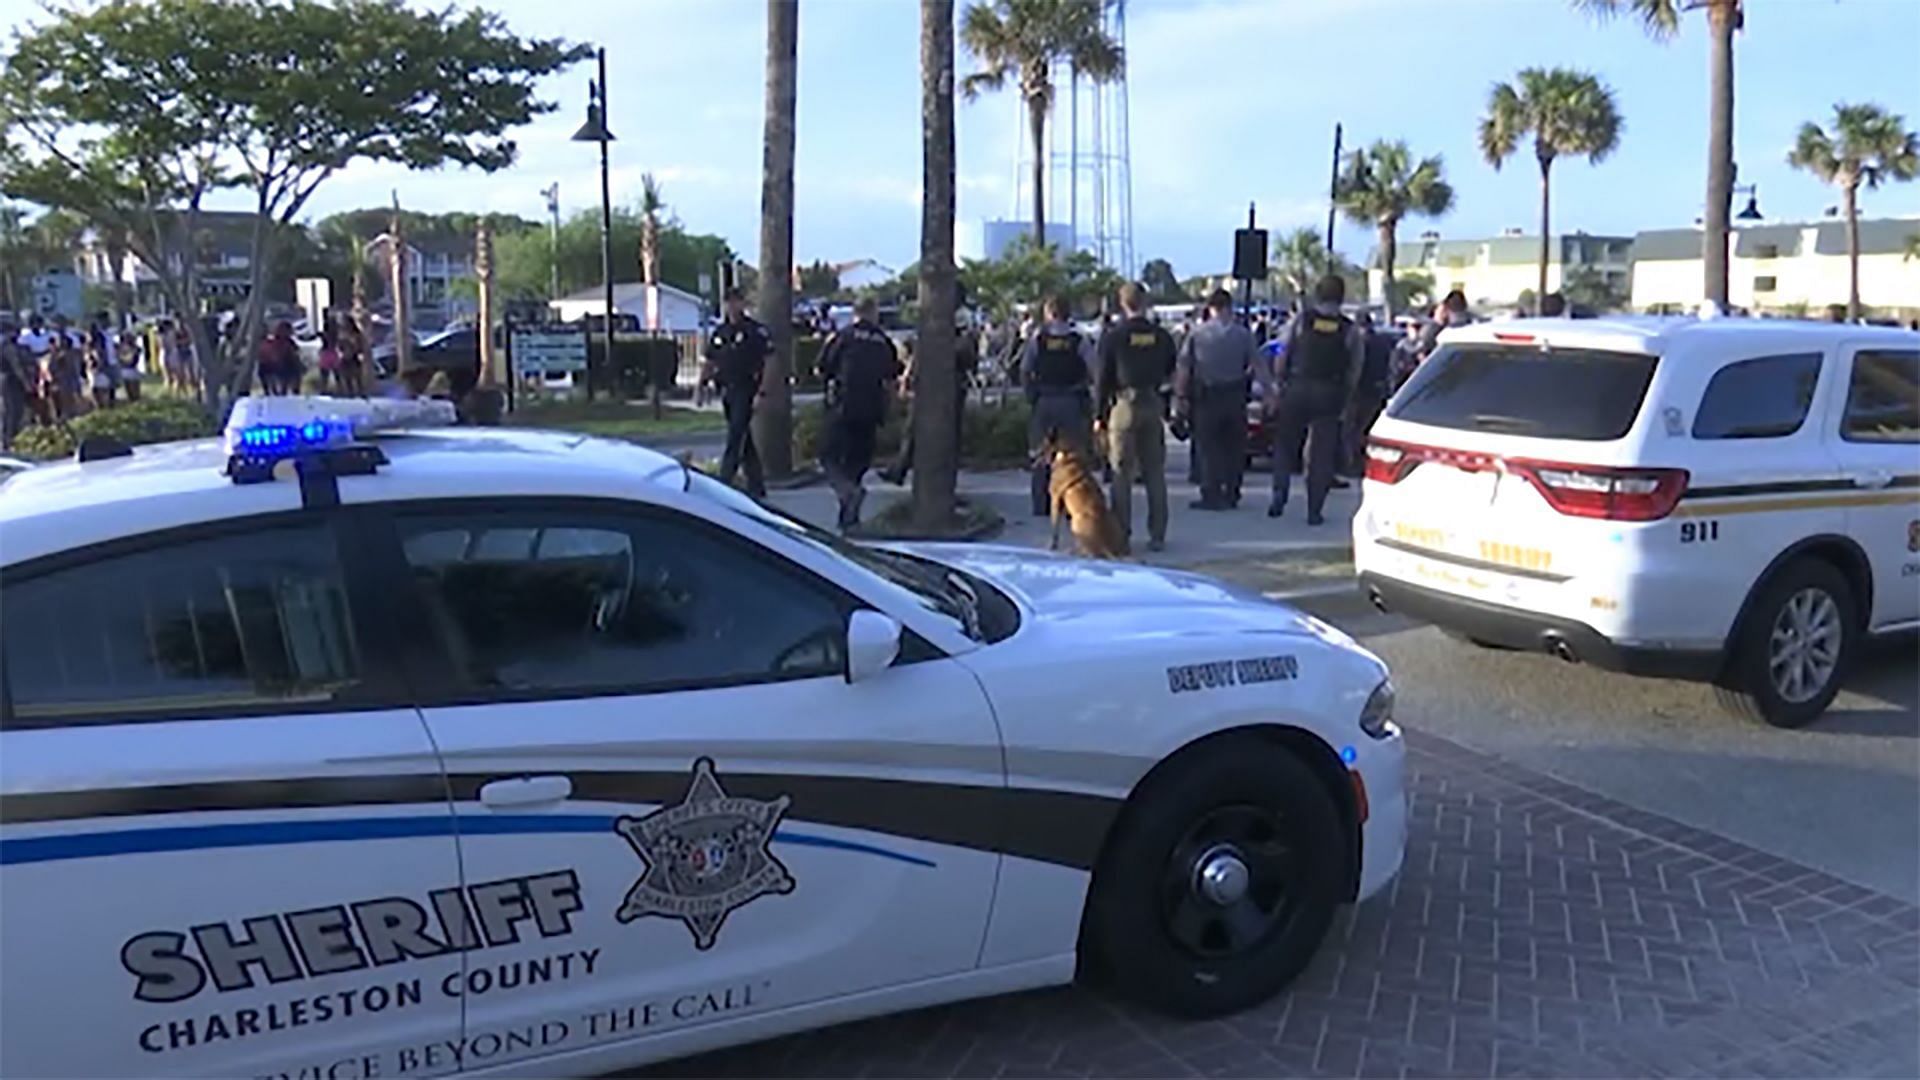 Shooting at a beach in South Carolina occurred on Friday, April 7 (Image via NBC News)